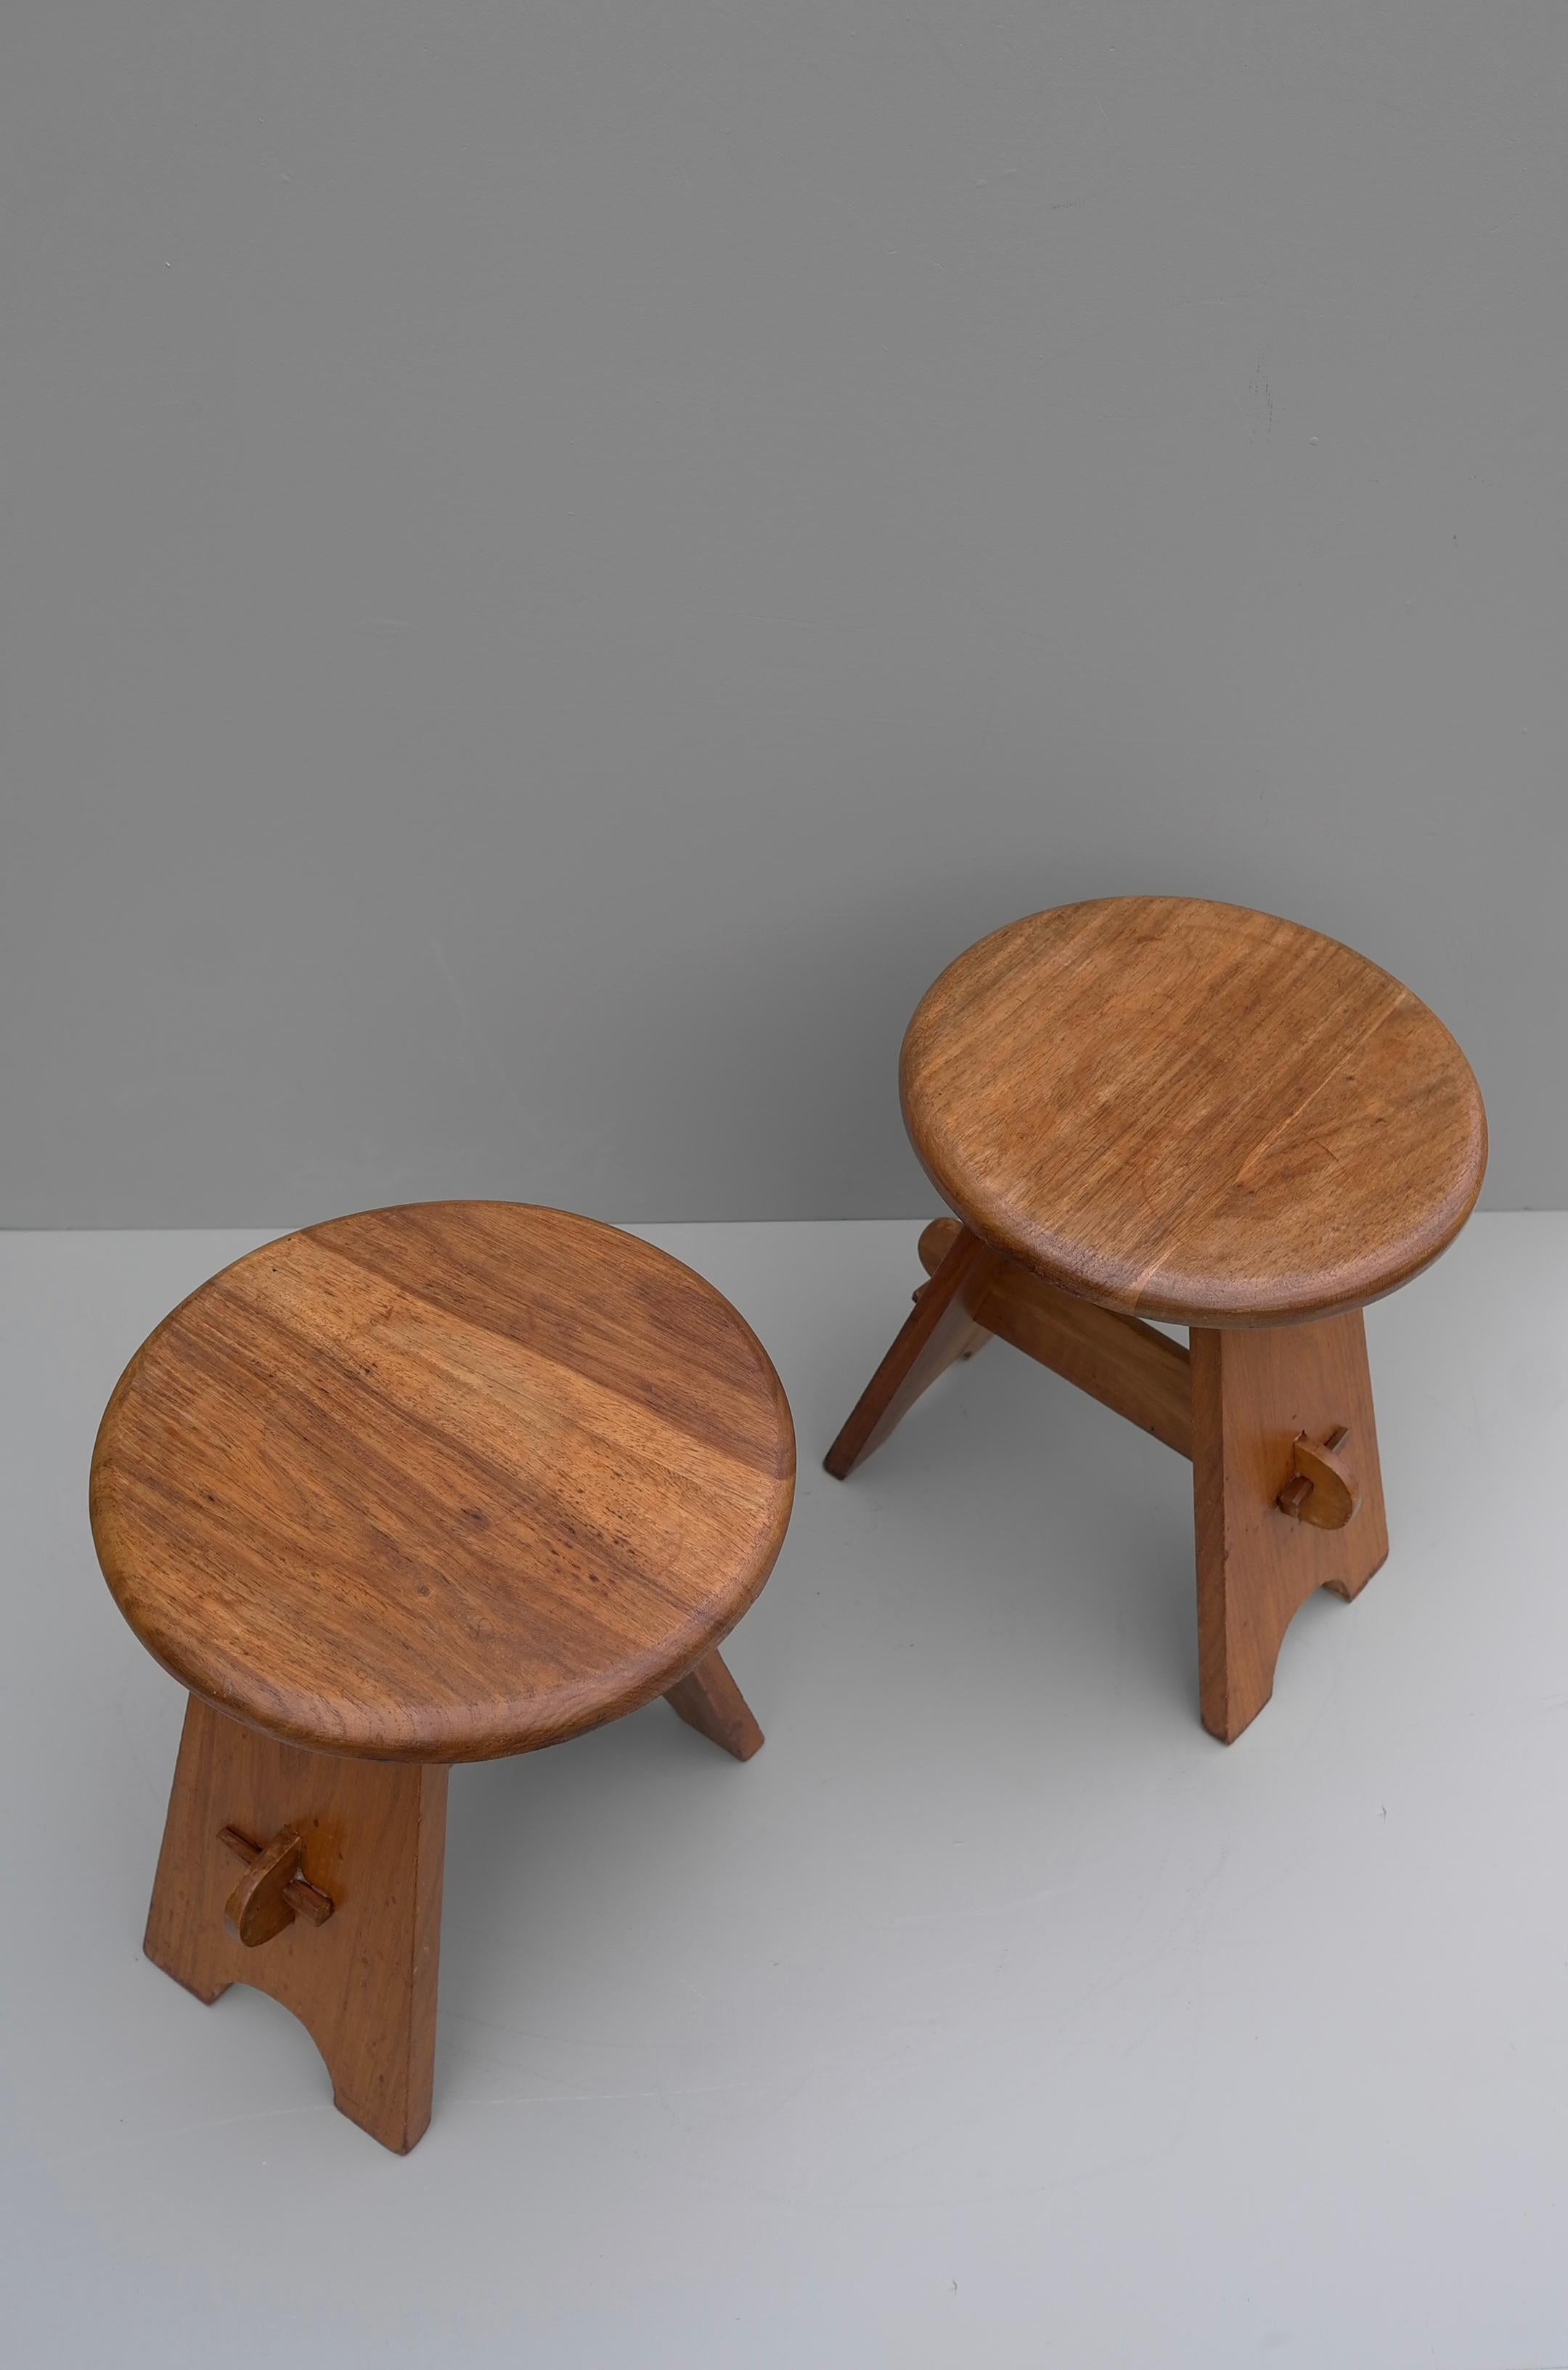 Pair of Midcentury Stools in Solid Elm Wood, France, 1950s For Sale 1